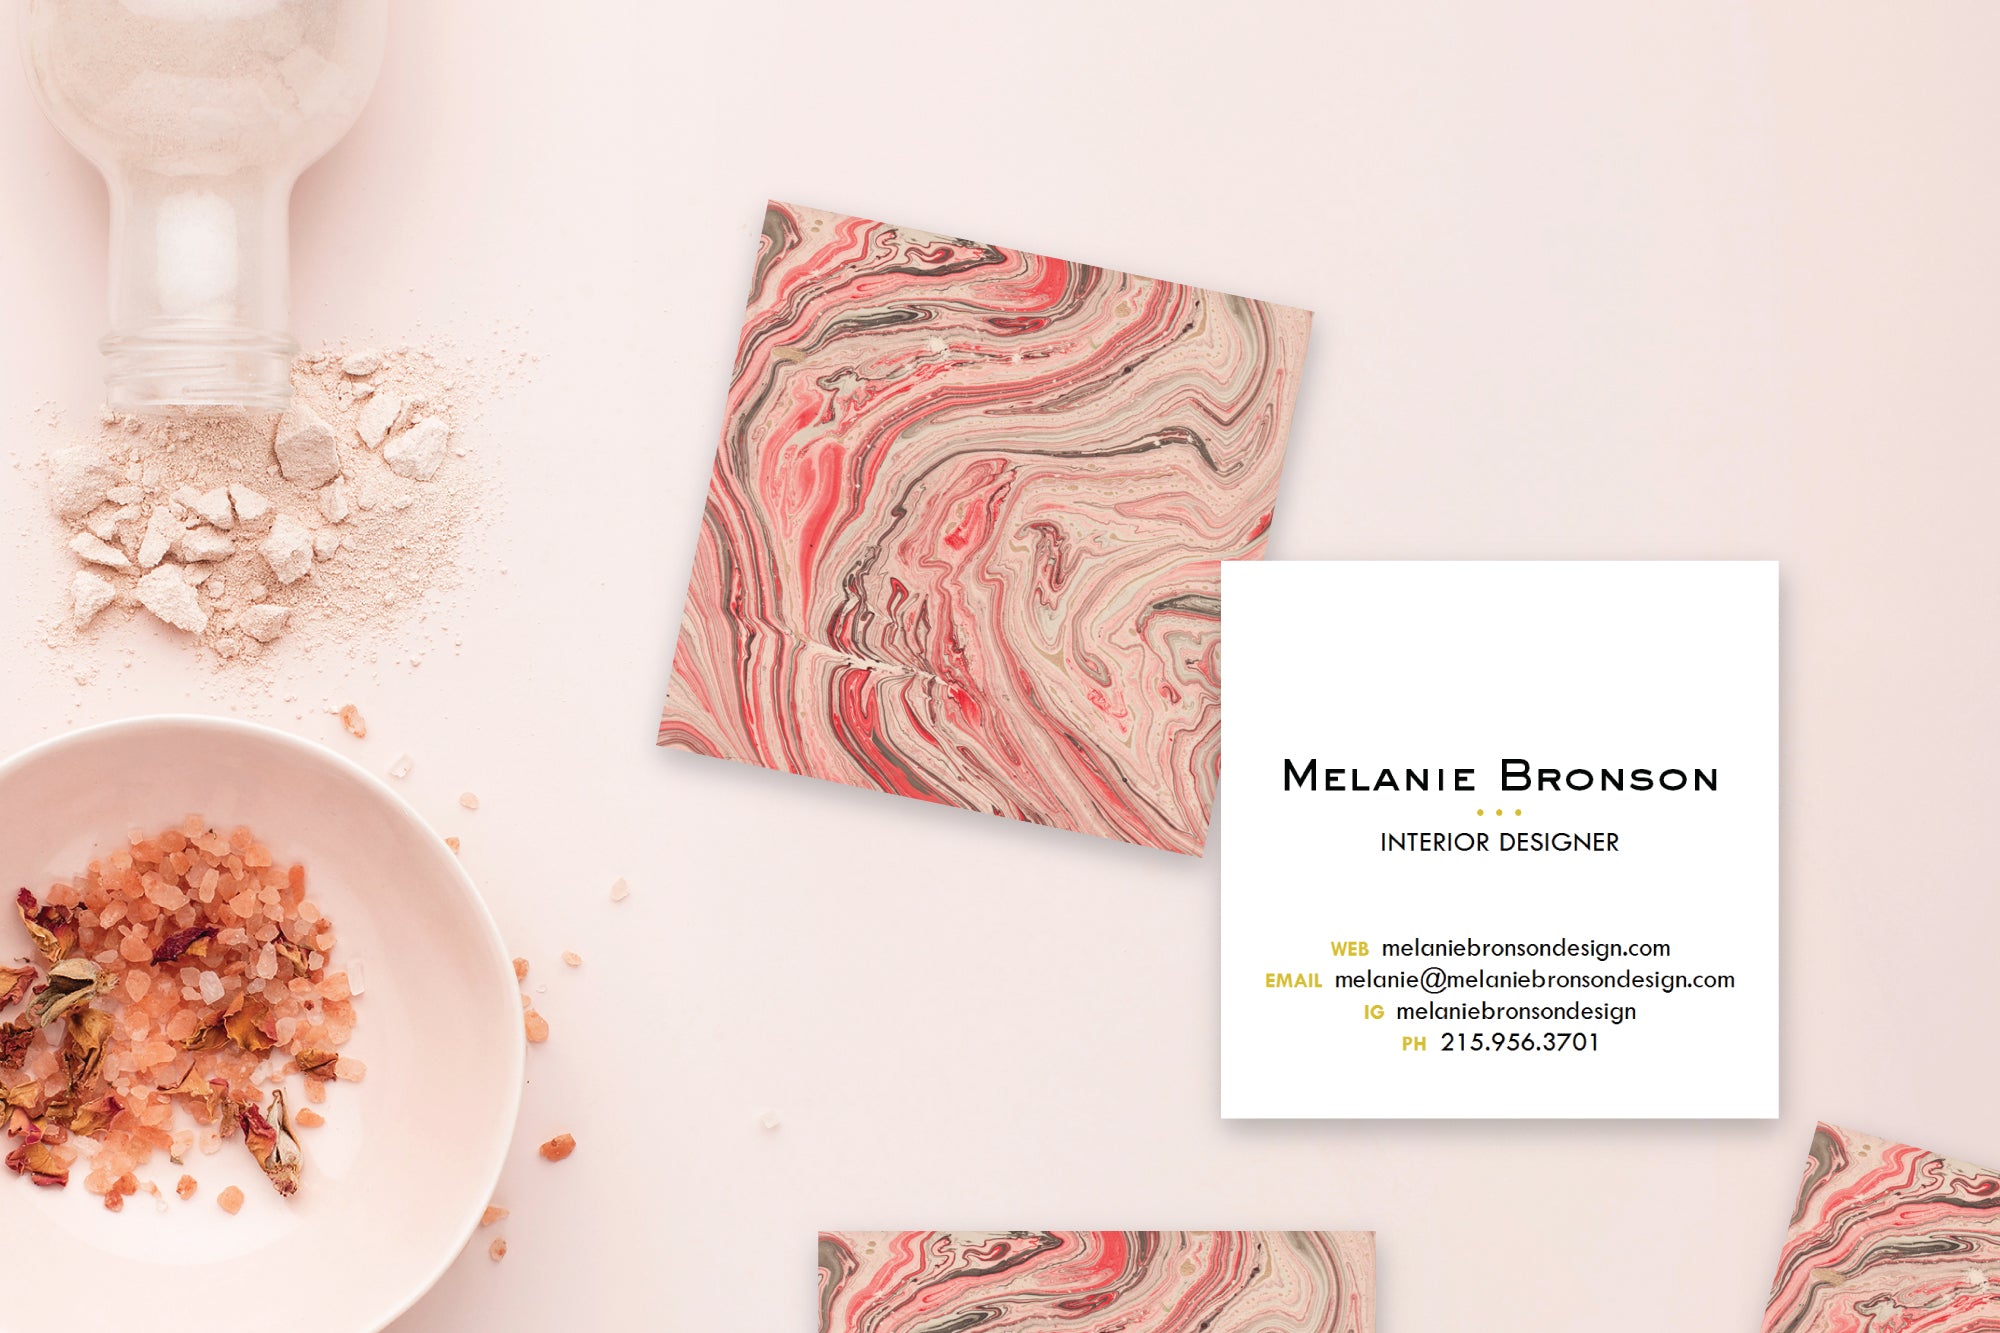 Coral|Grey Marble Calling Cards